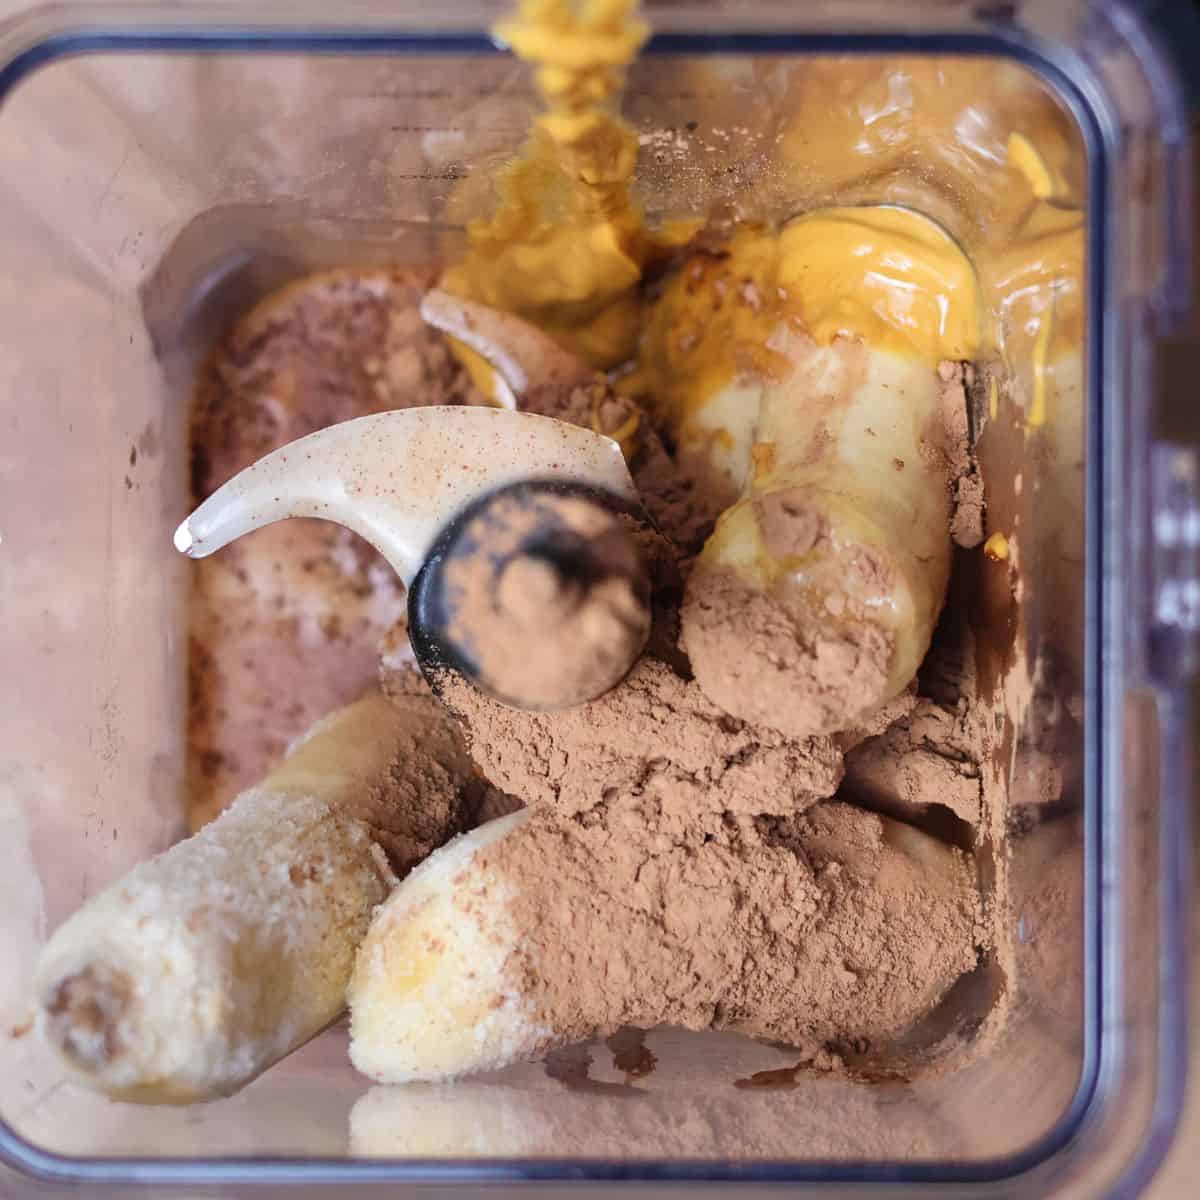 A blender filled with ingredients for a peanut butter banana chocolate smoothie. The ingredients are: sliced bananas, cocoa powder, maple syrup, almond milk, and peanut butter.